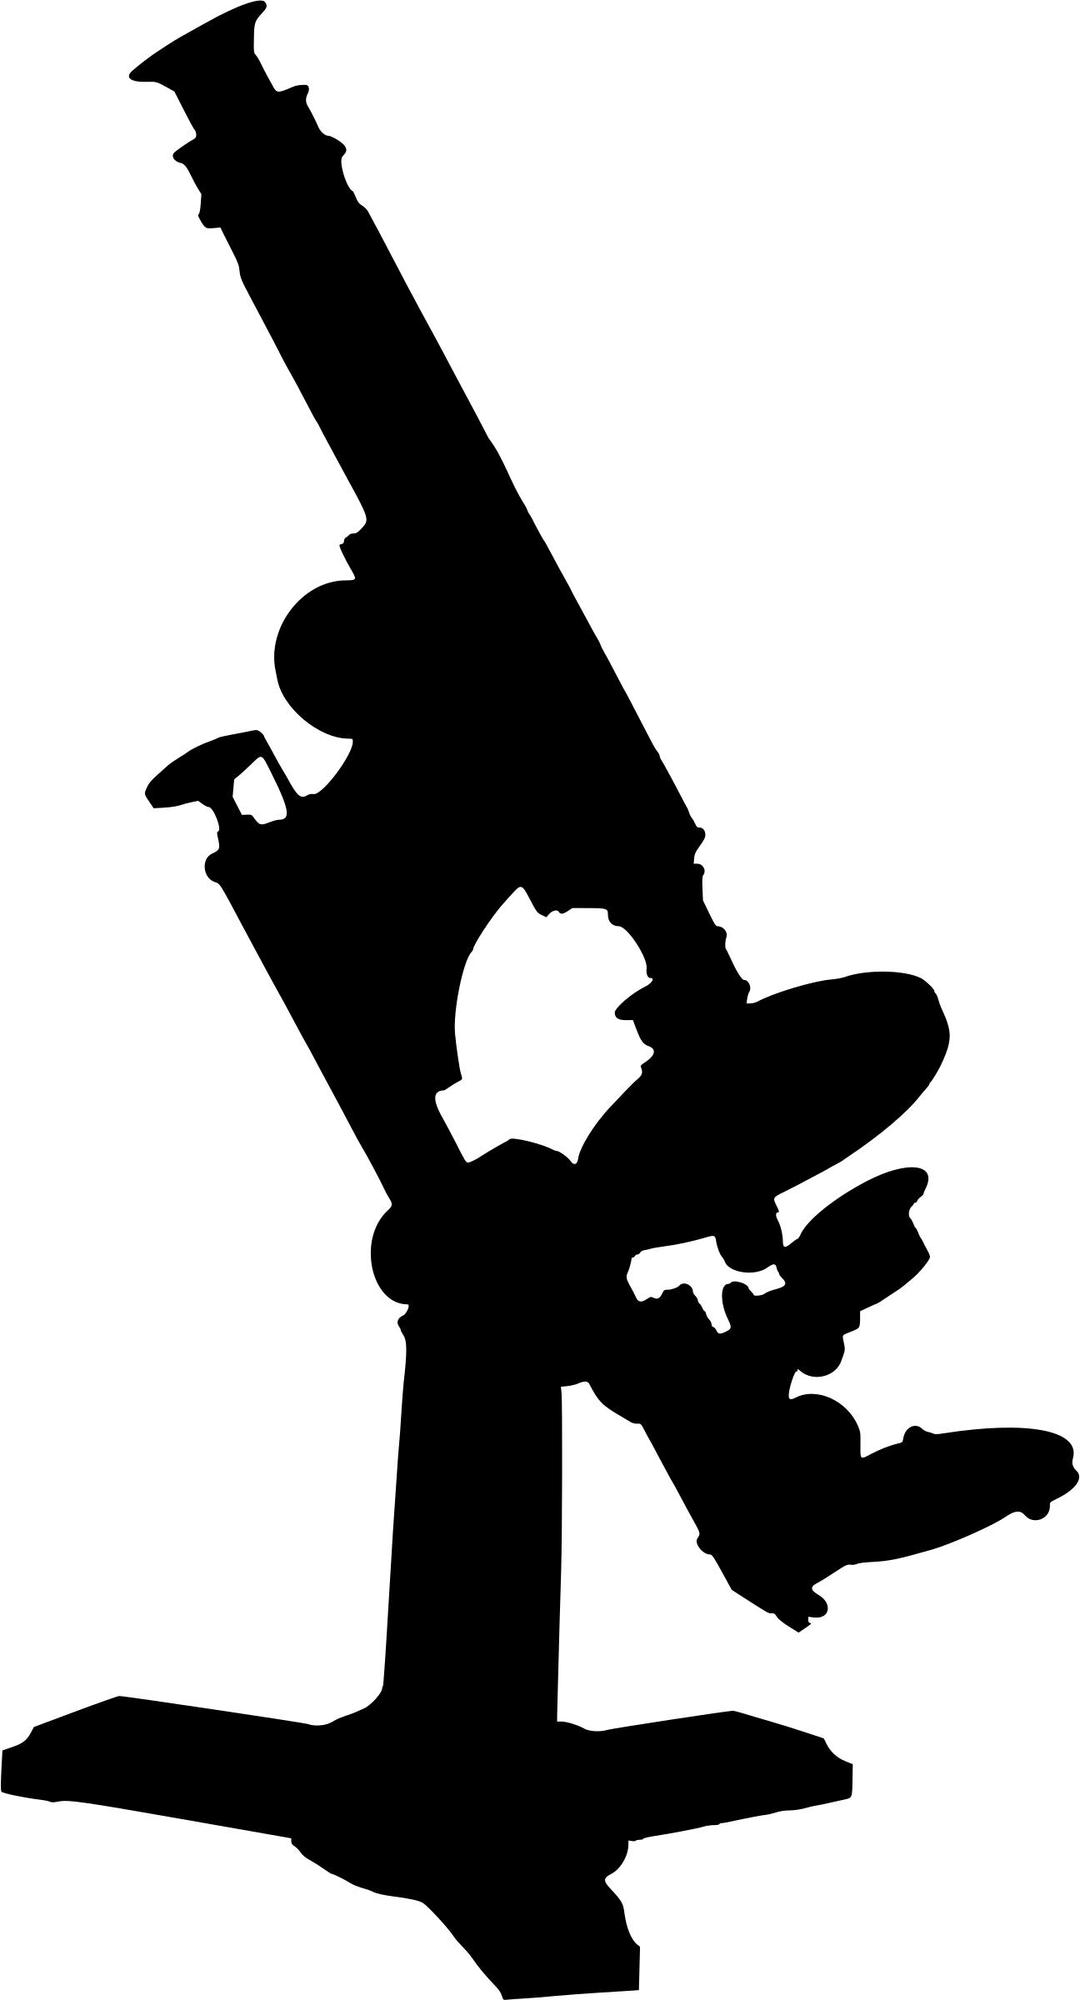 Microscope (silhouette) png transparent